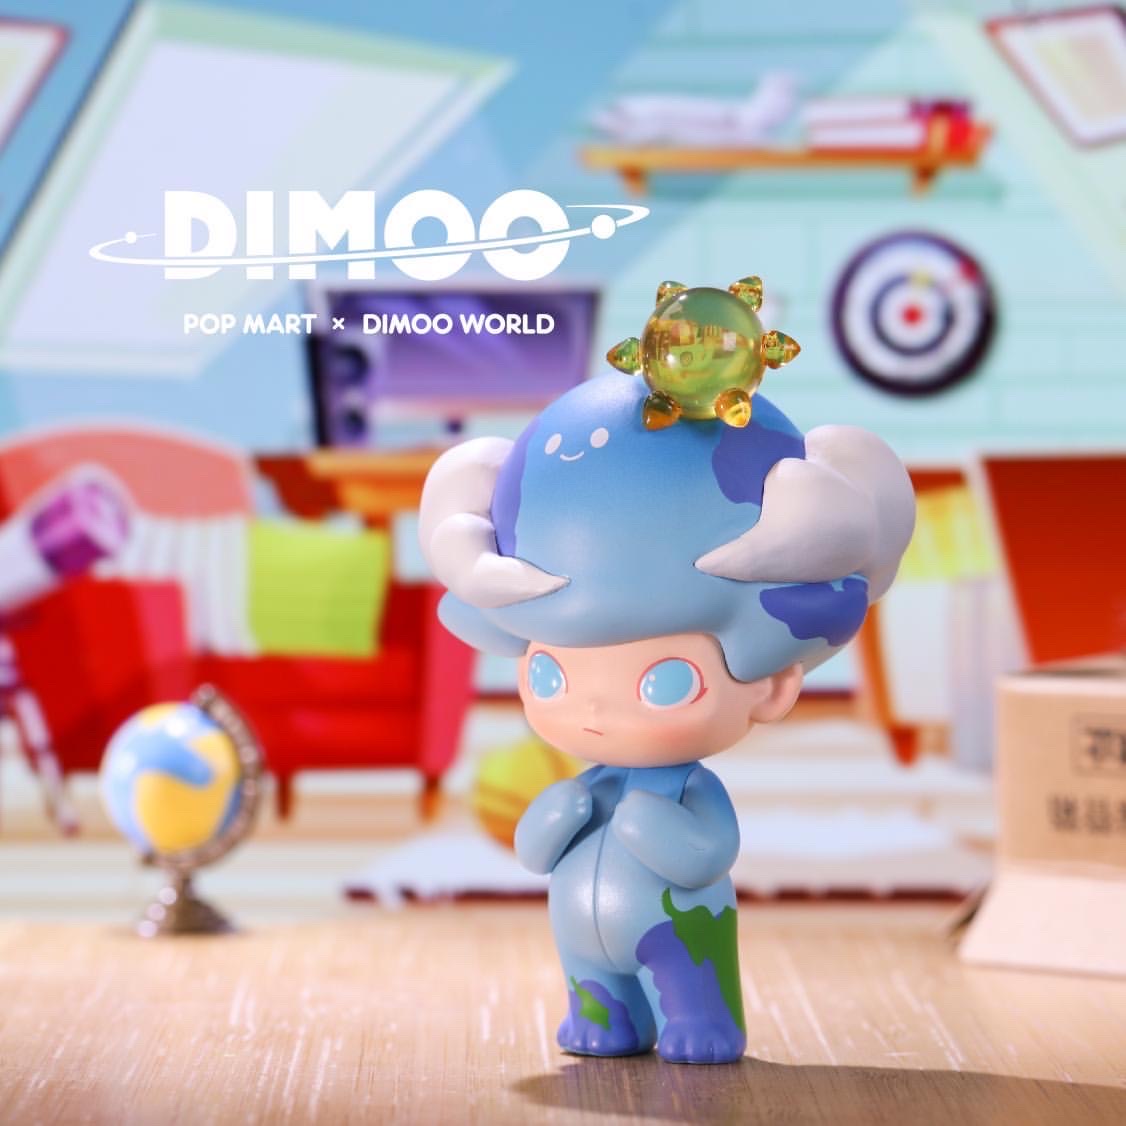 Dimoo Space Travel Mini Series by Ayan x Pop Mart